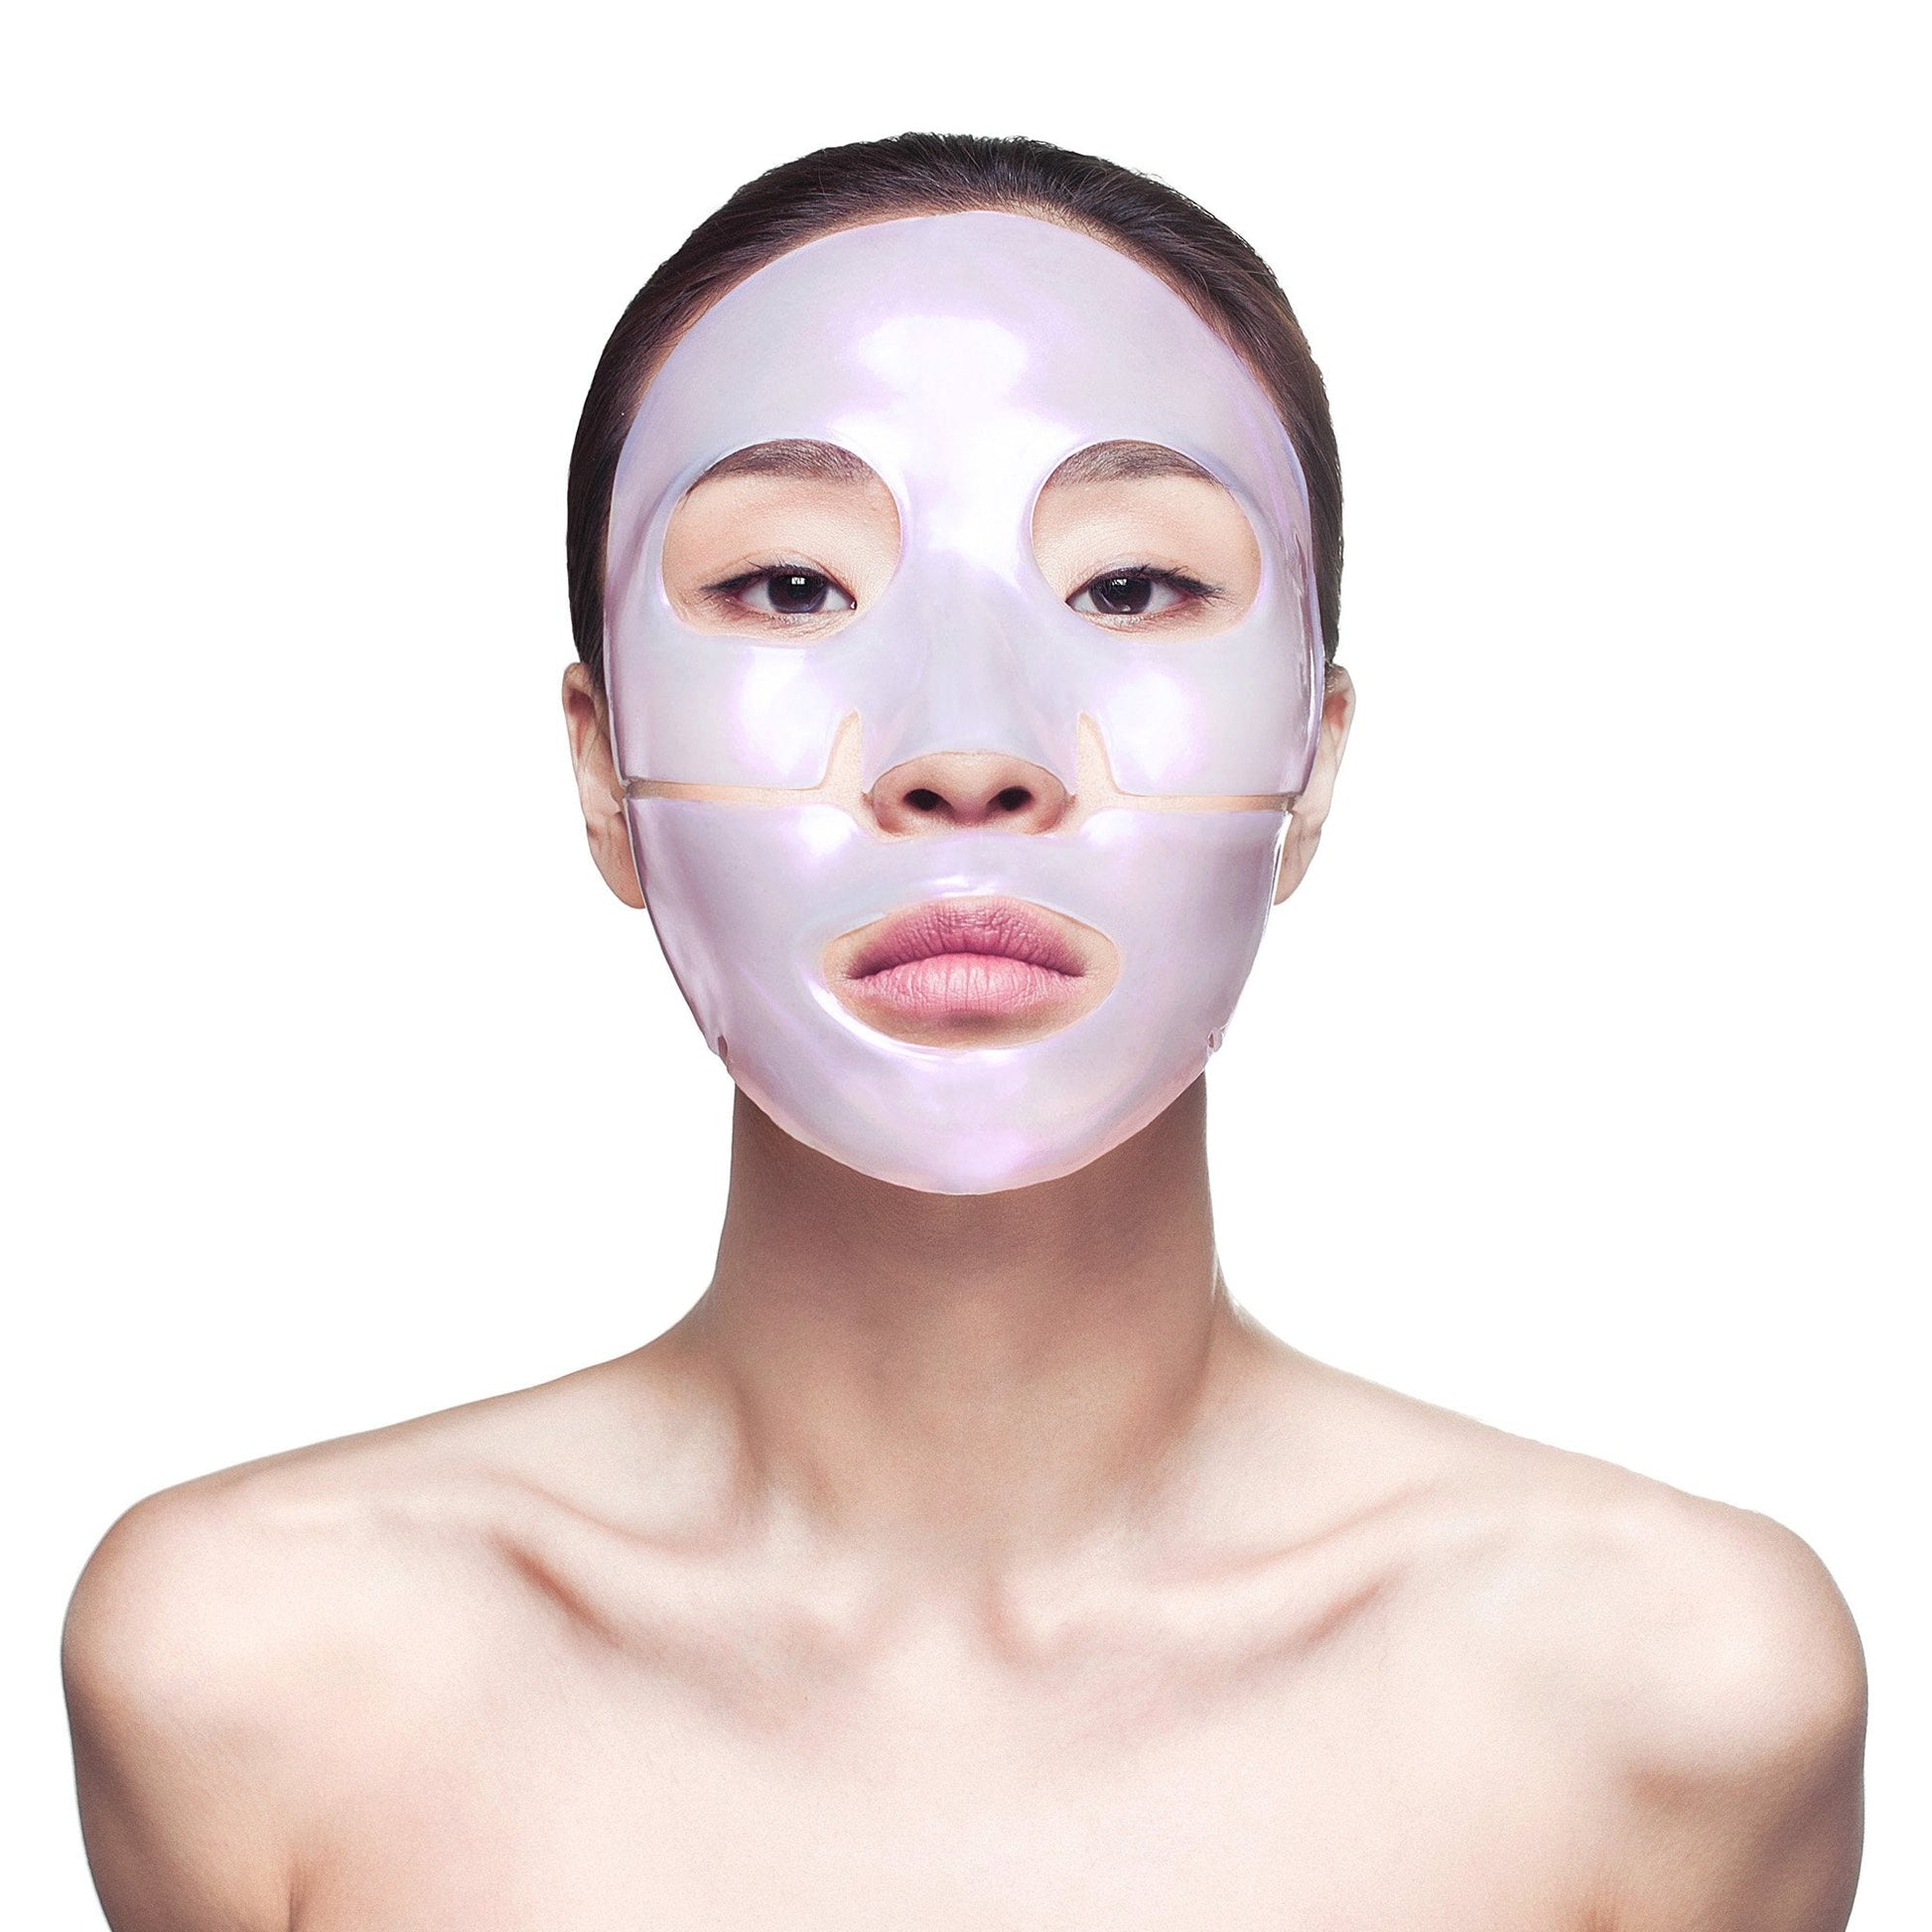 Buy Online Best Diamond Radiance Face Mask | Buy innovative clinical skincare products - TOPBODY